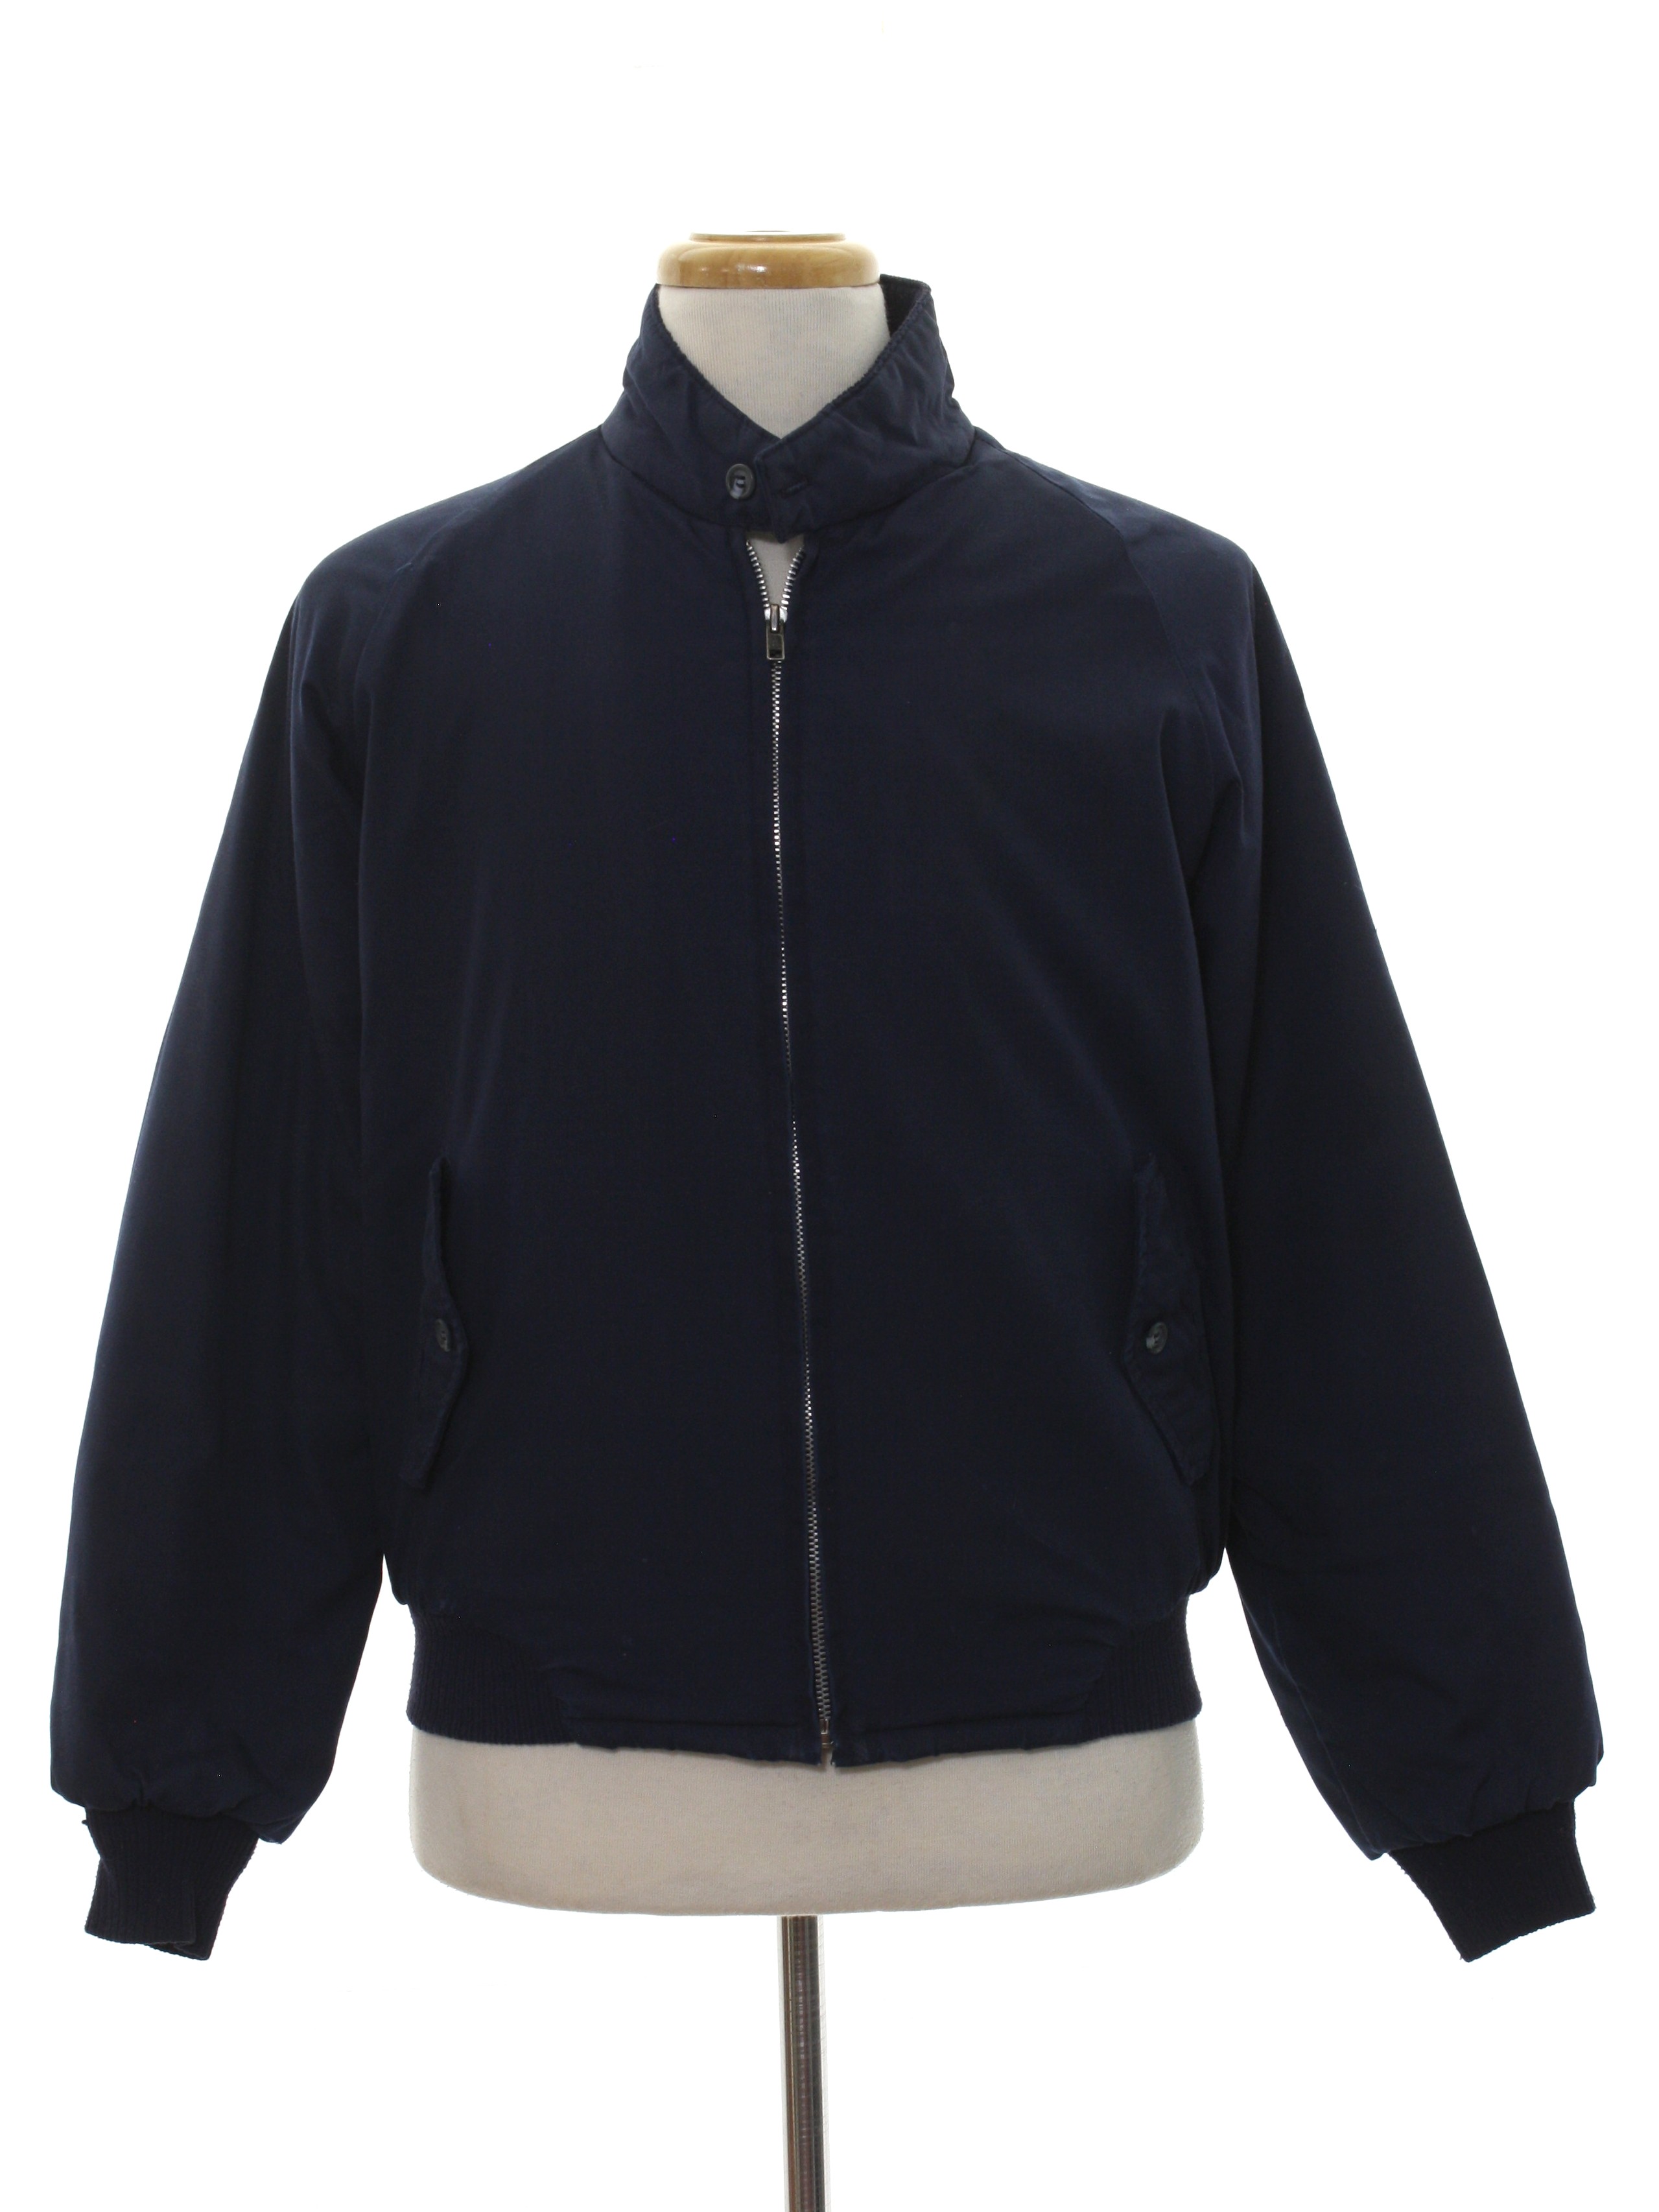 Retro 1960s Jacket: Early 60s -Sir Jac- Mens midnight blue background